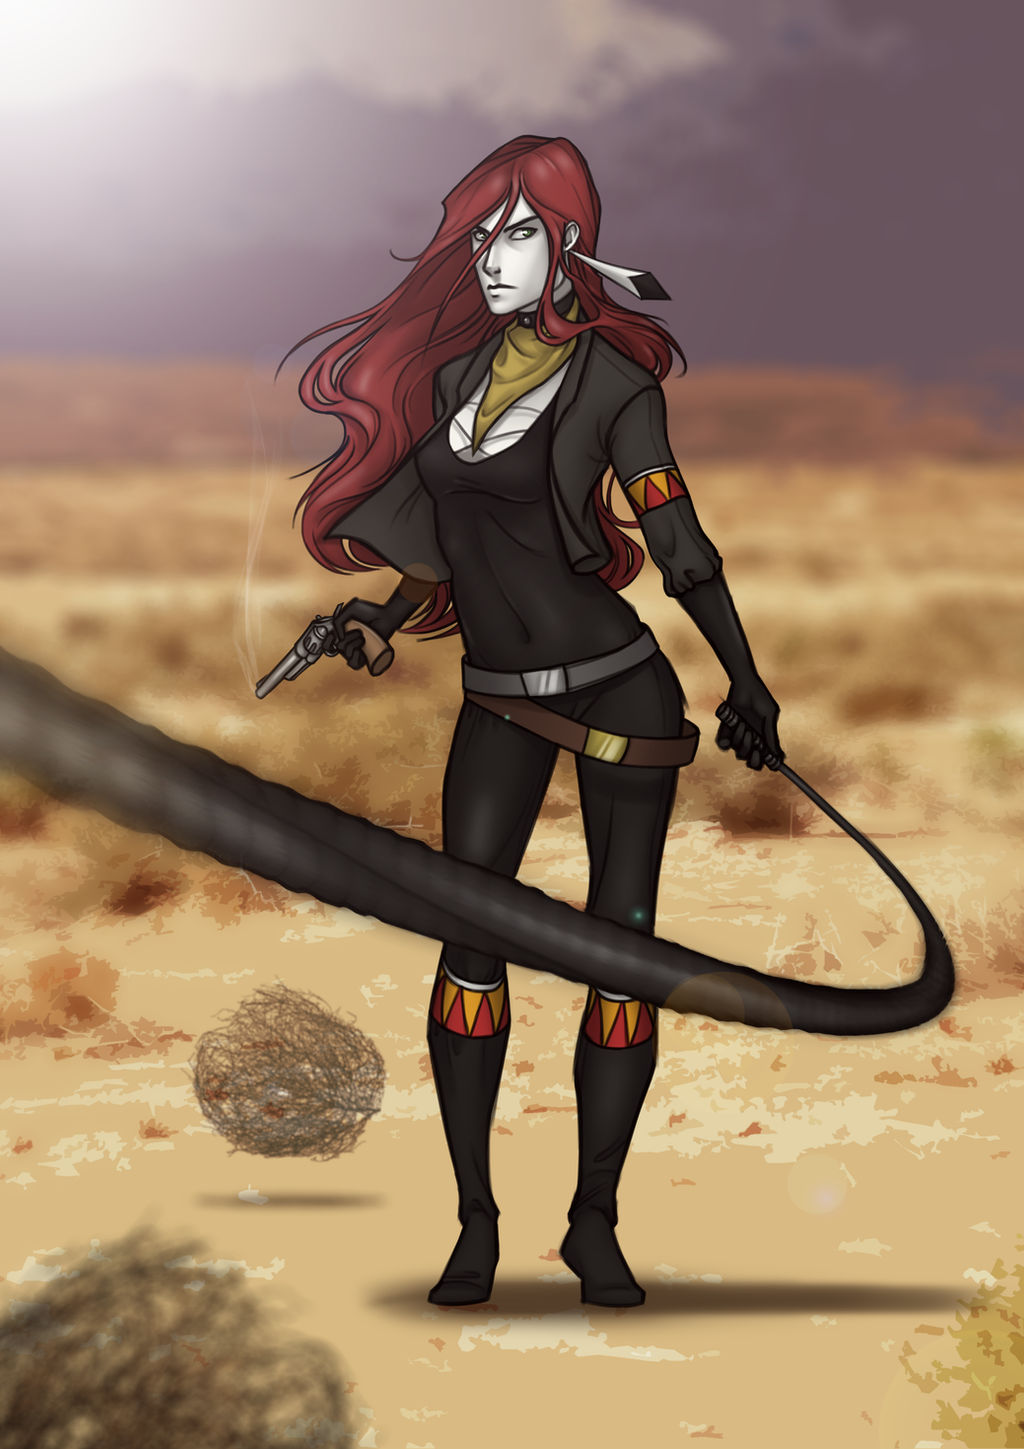 The legend of Calamity Jane by R0DV14S04M3N on DeviantArt